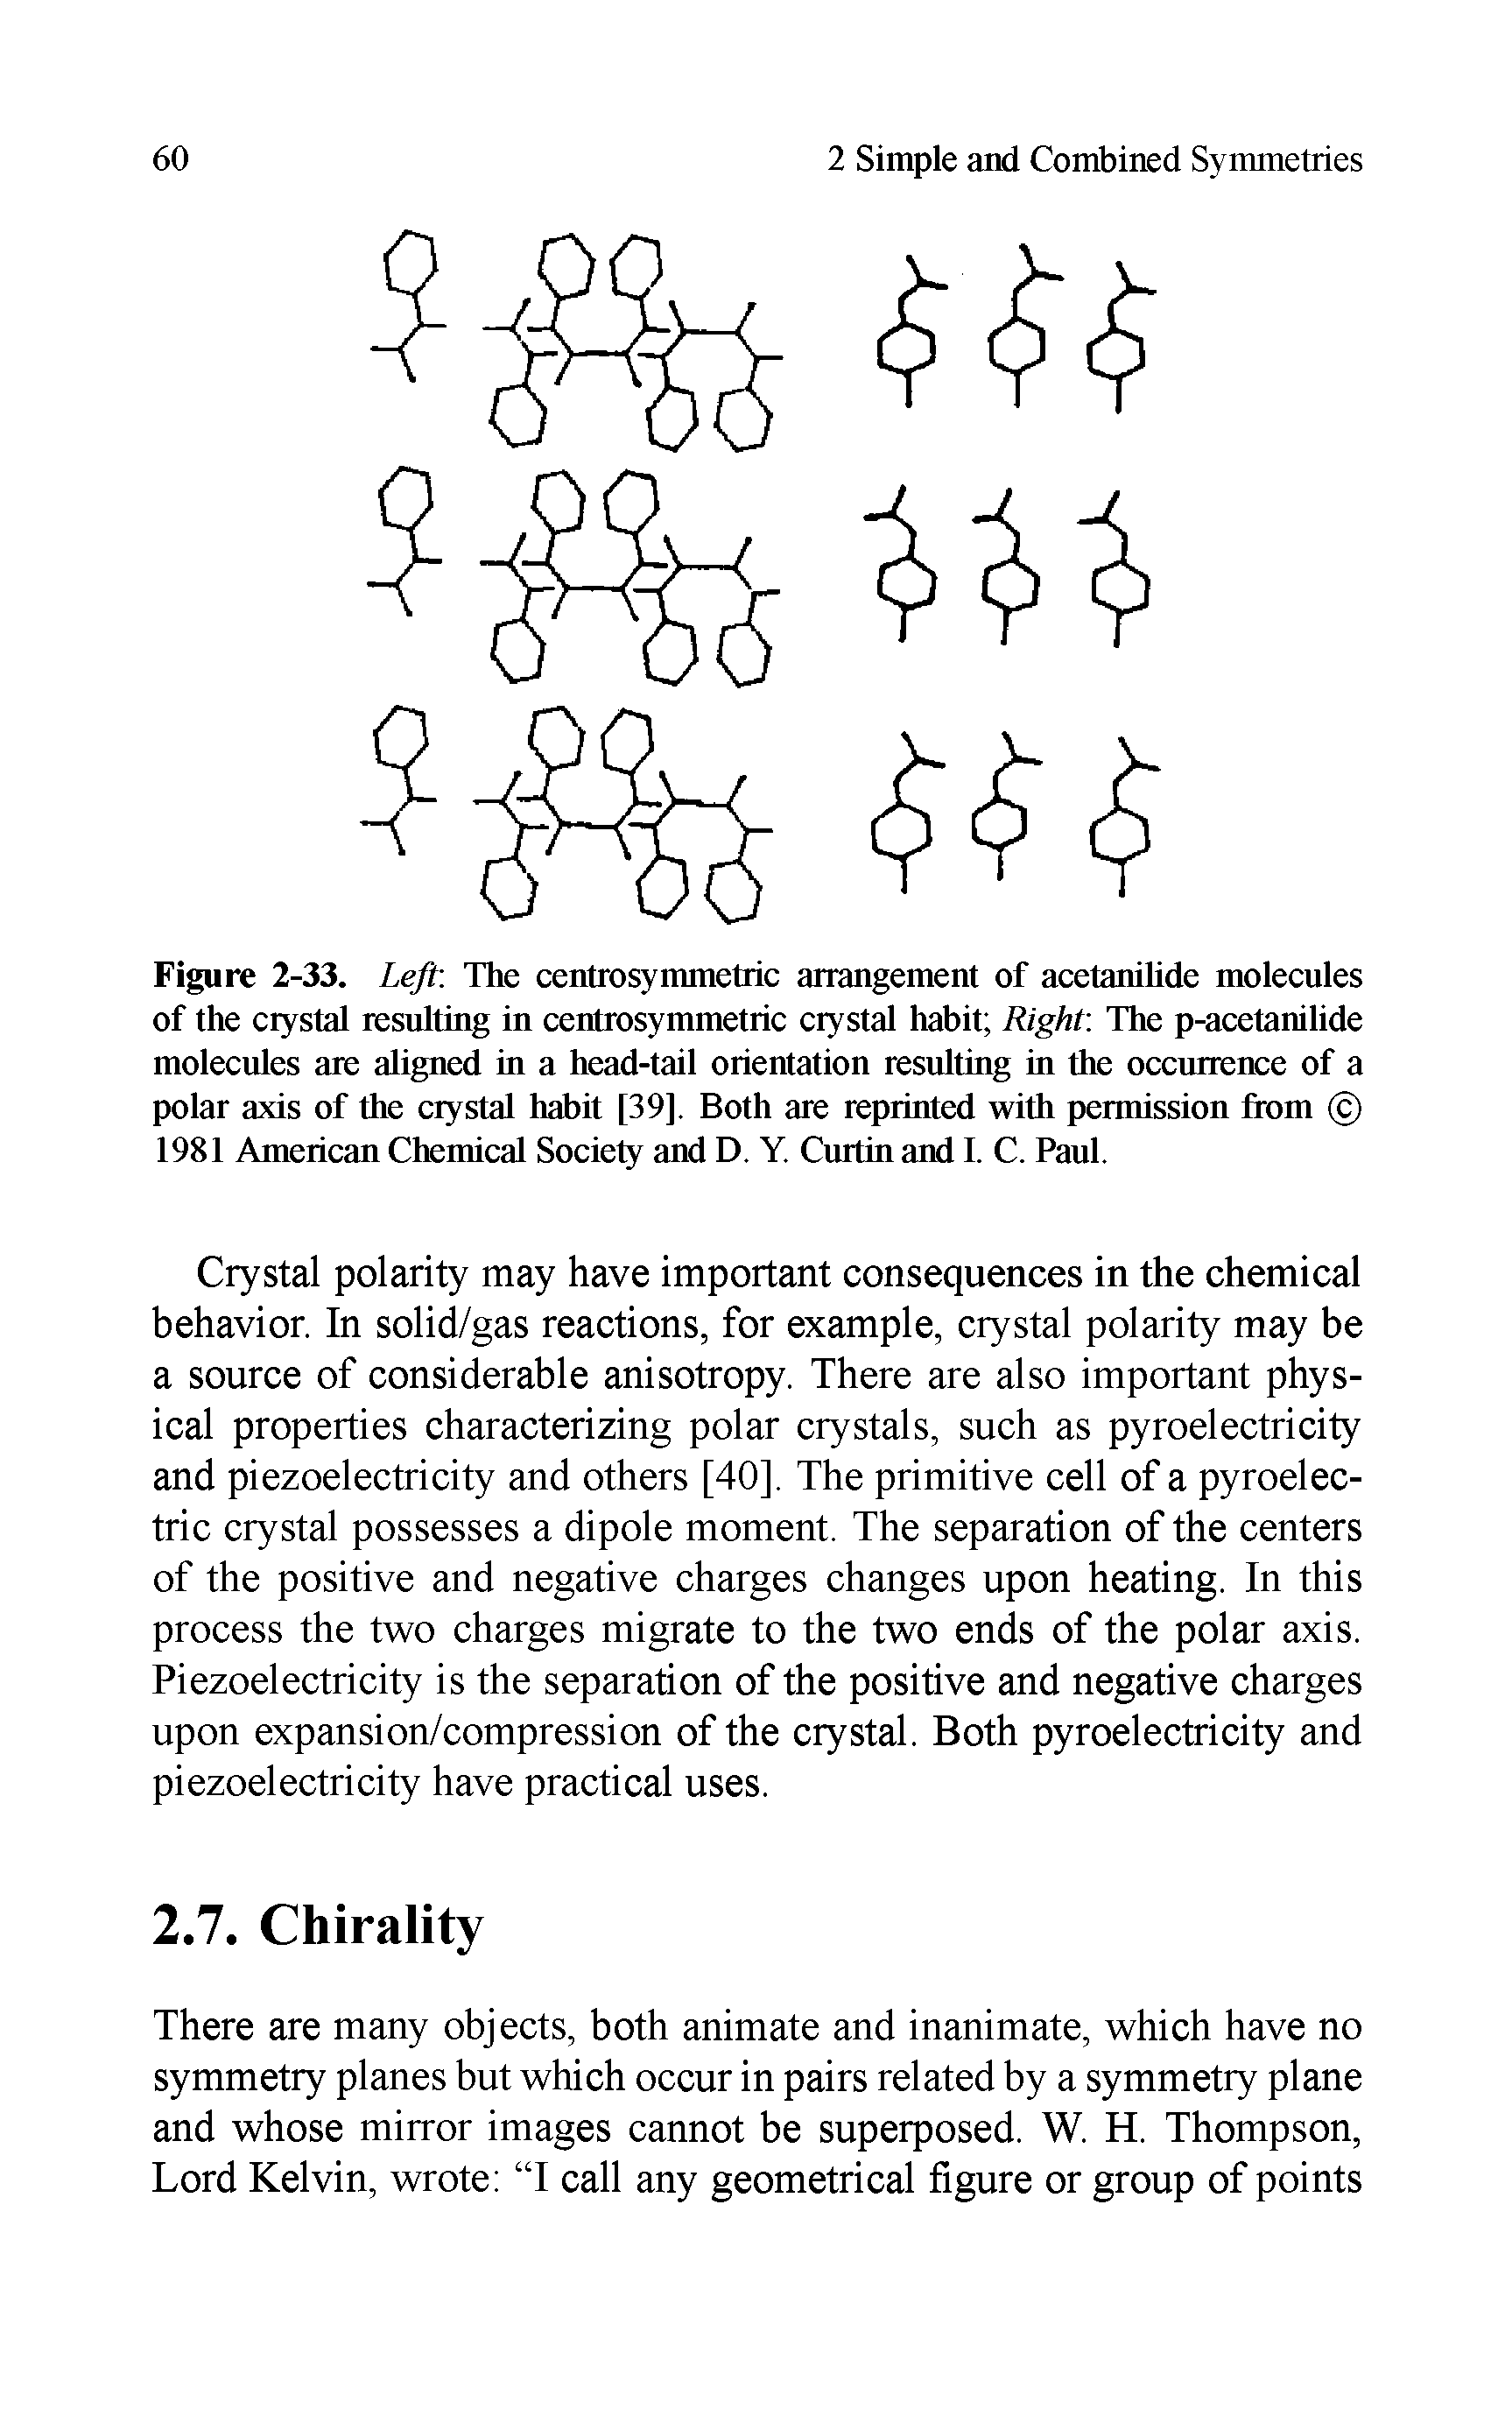 Figure 2-33. Left The centrosymmetric arrangement of acetanilide molecules of the crystal resulting in centrosymmetric crystal habit Right. The p-acetanilide molecules are aligned in a head-tail orientation resulting in the occurrence of a polar axis of the crystal habit [39], Both are reprinted with permission from 1981 American Chemical Society and D. Y. Curtin and I. C. Paul.